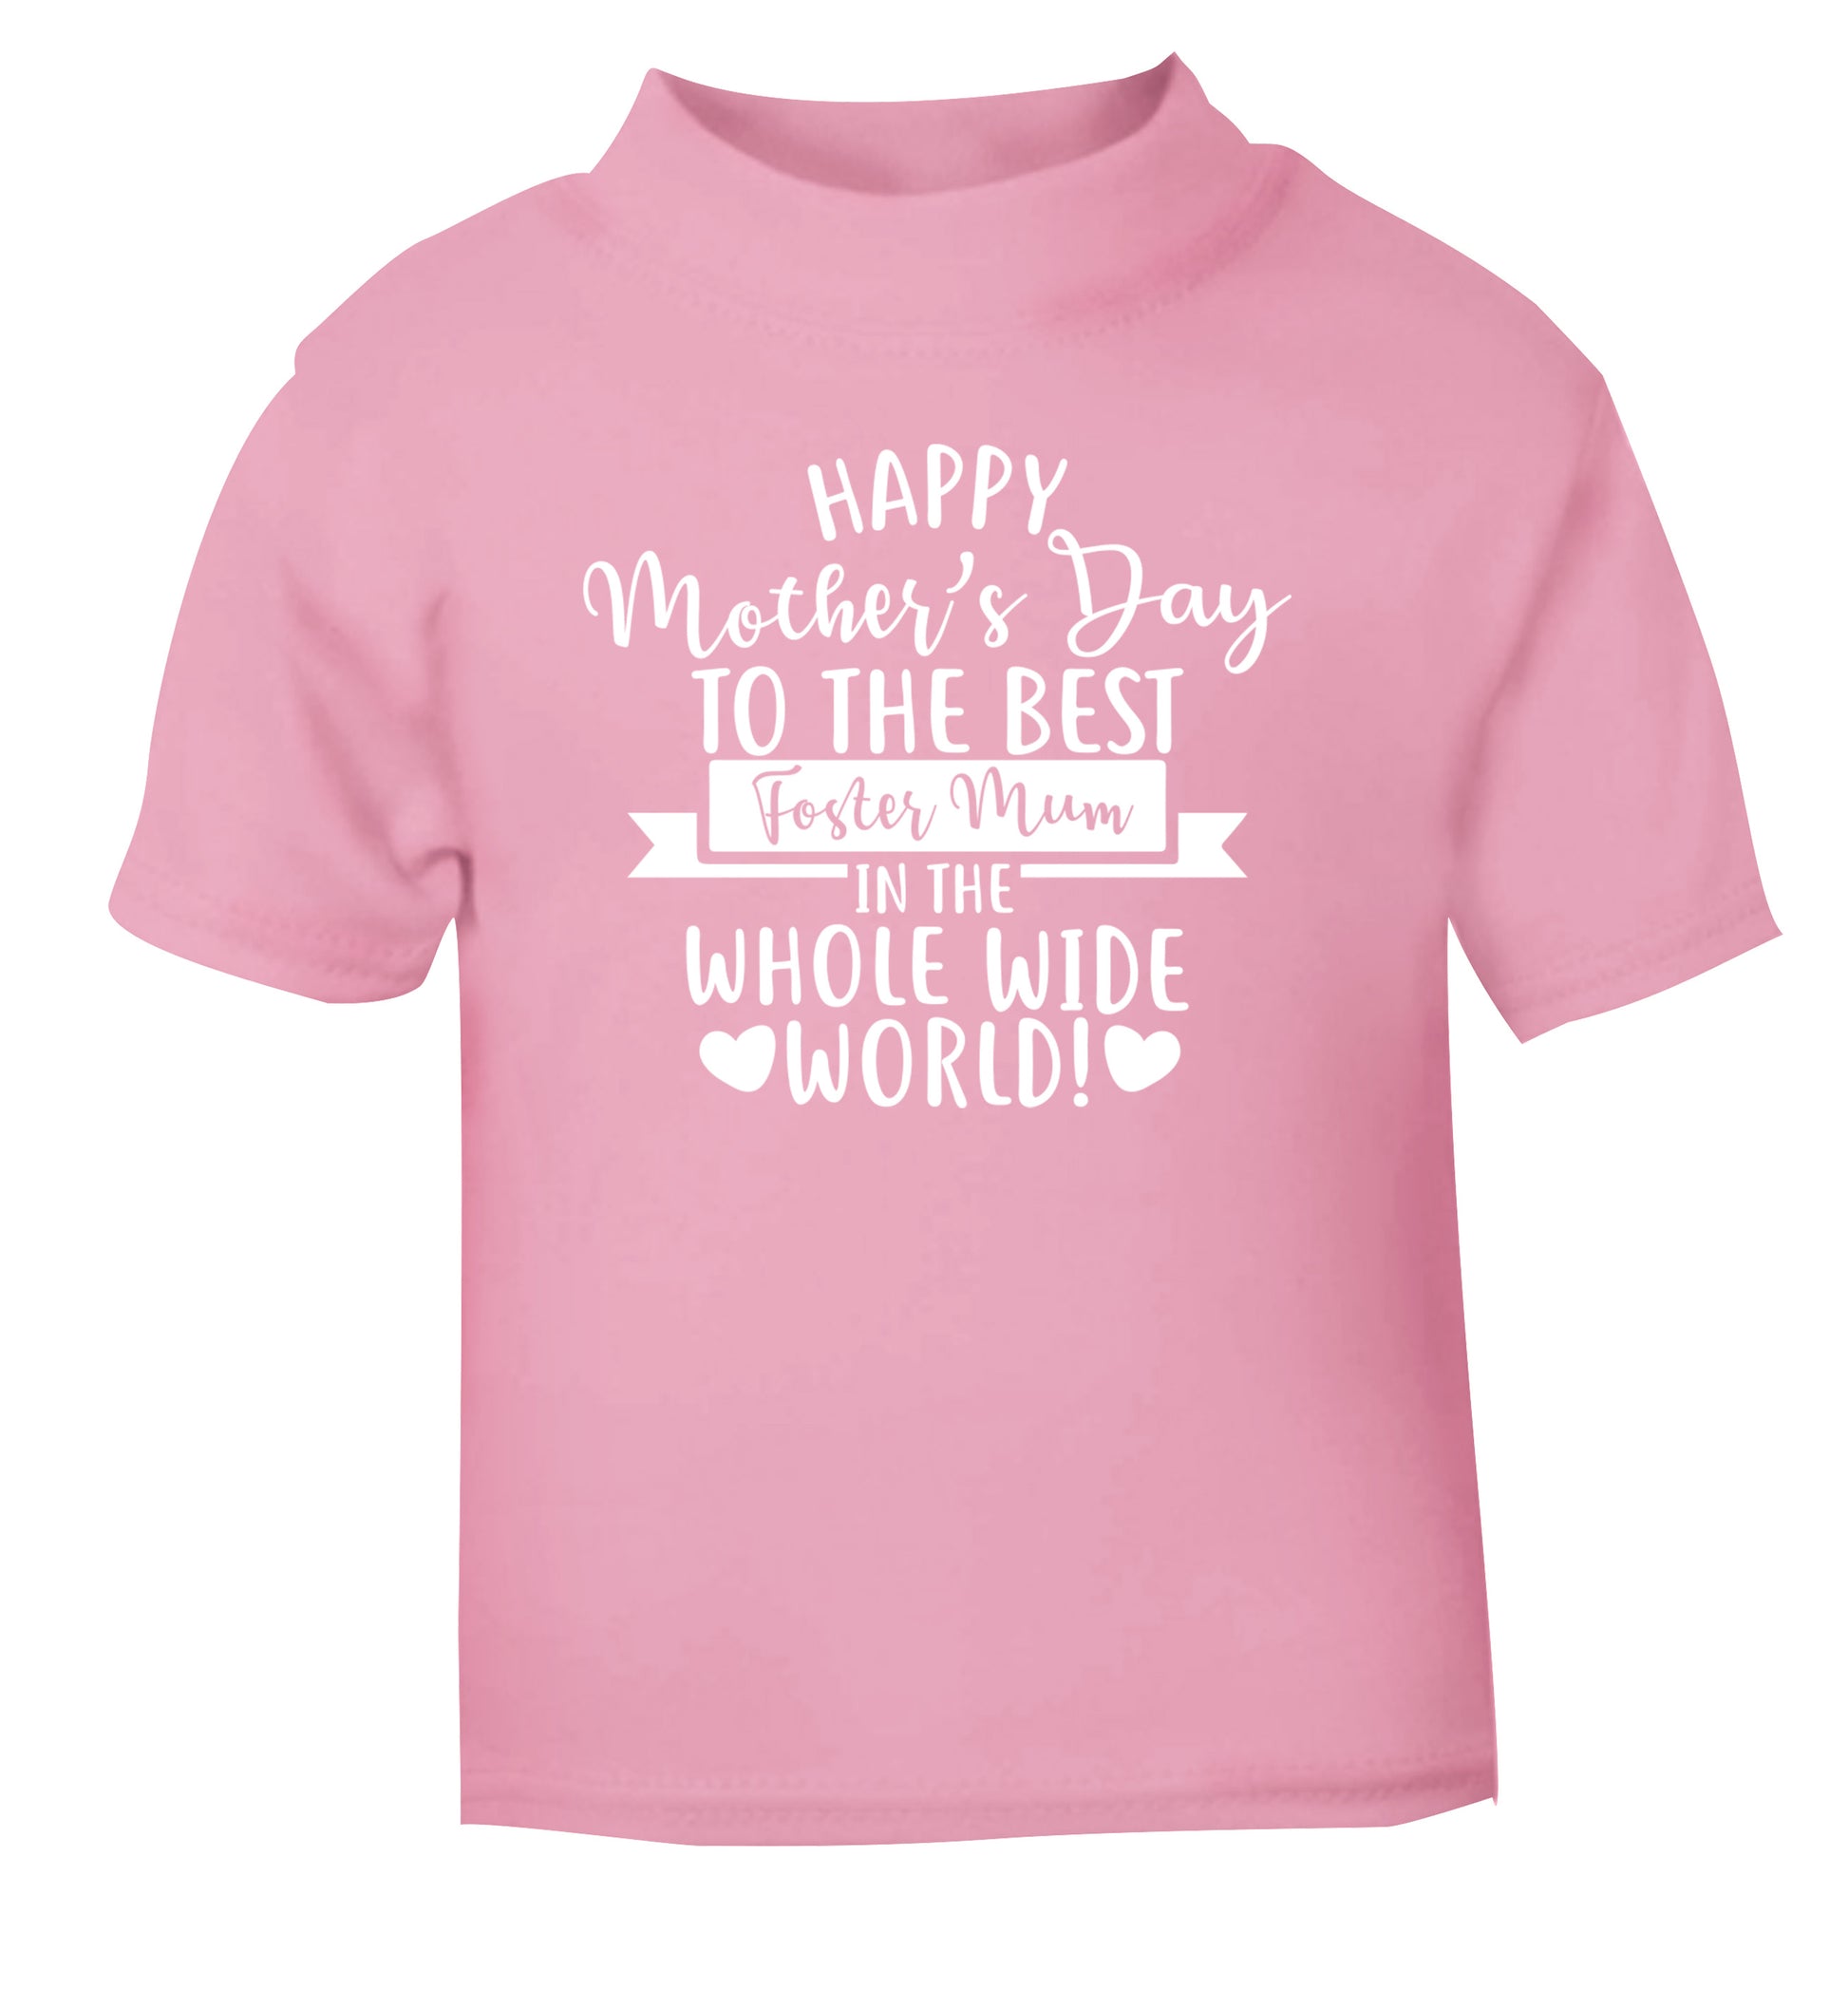 Happy mother's day to the best foster mum in the world light pink baby toddler Tshirt 2 Years